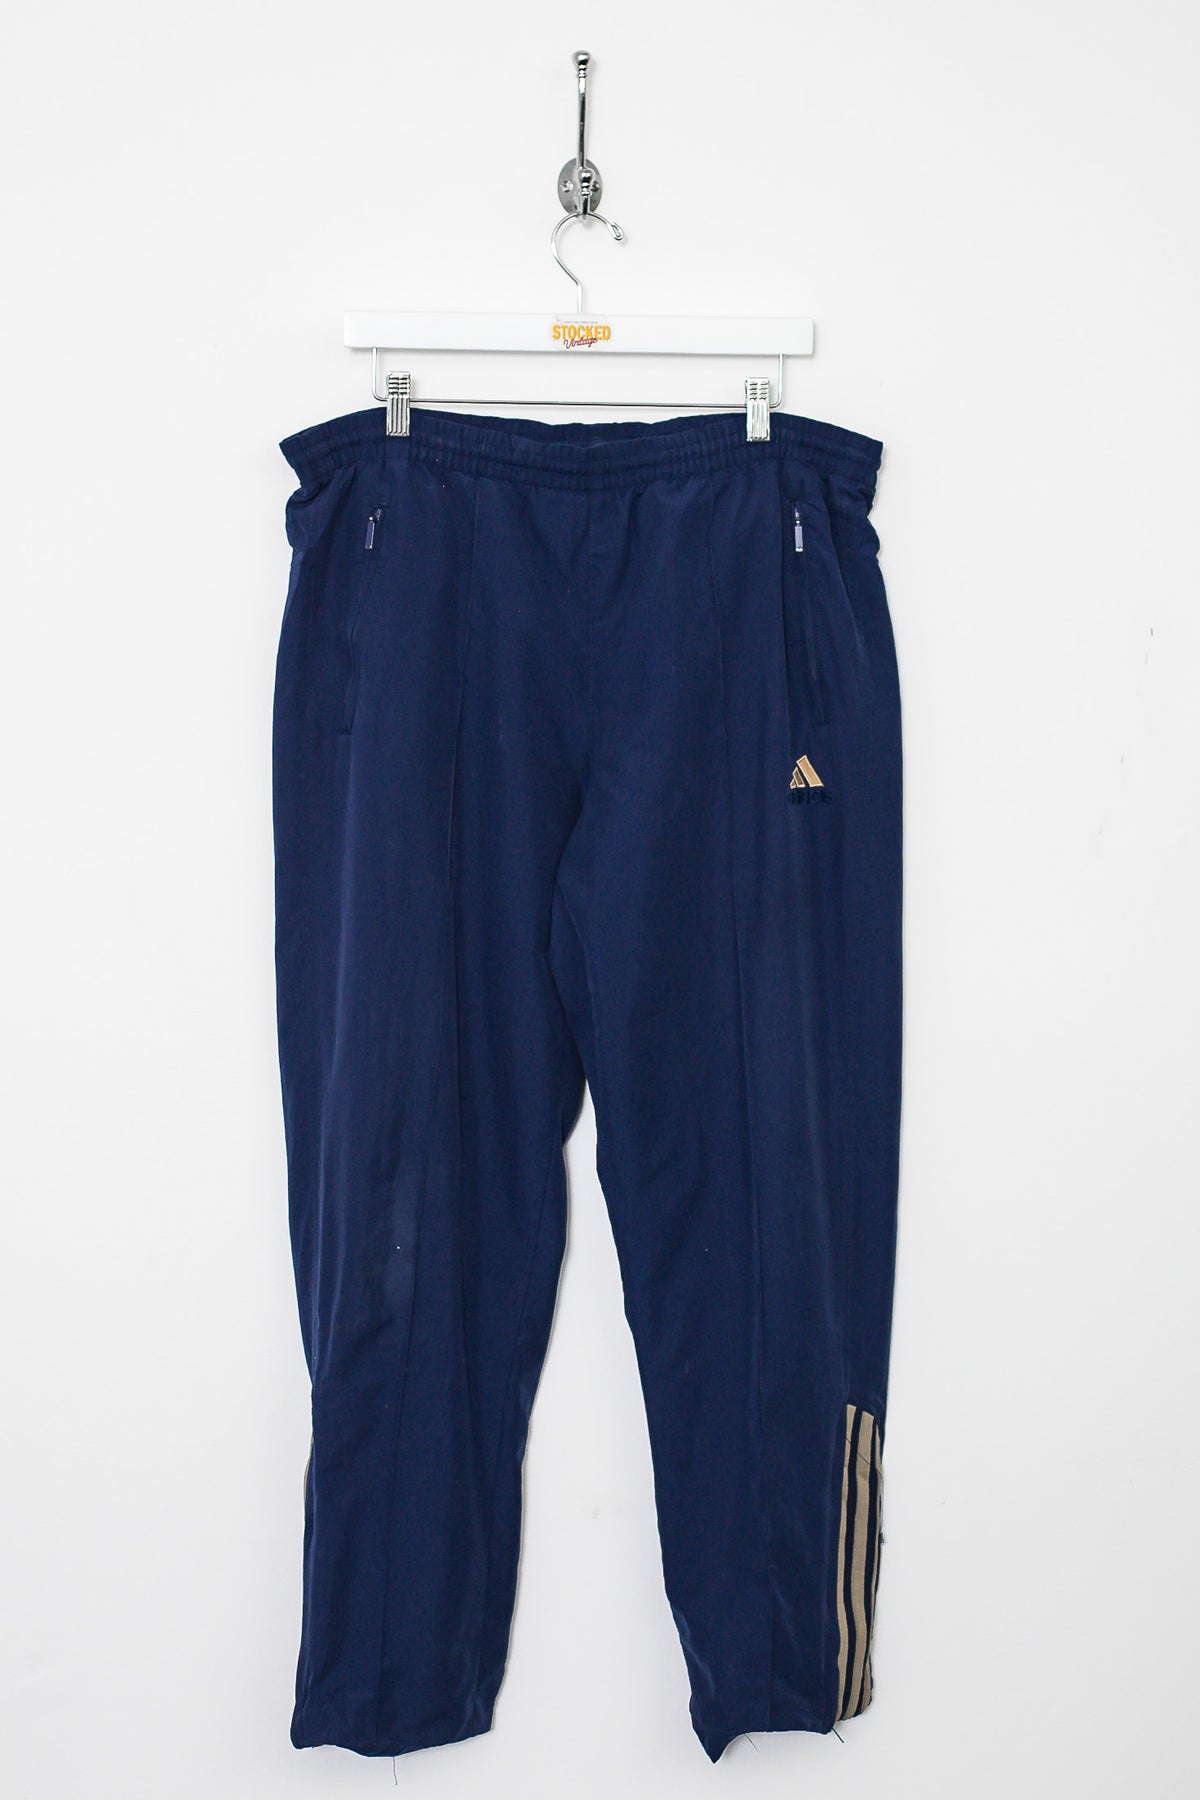 00s Adidas Tracksuit Bottoms (L)